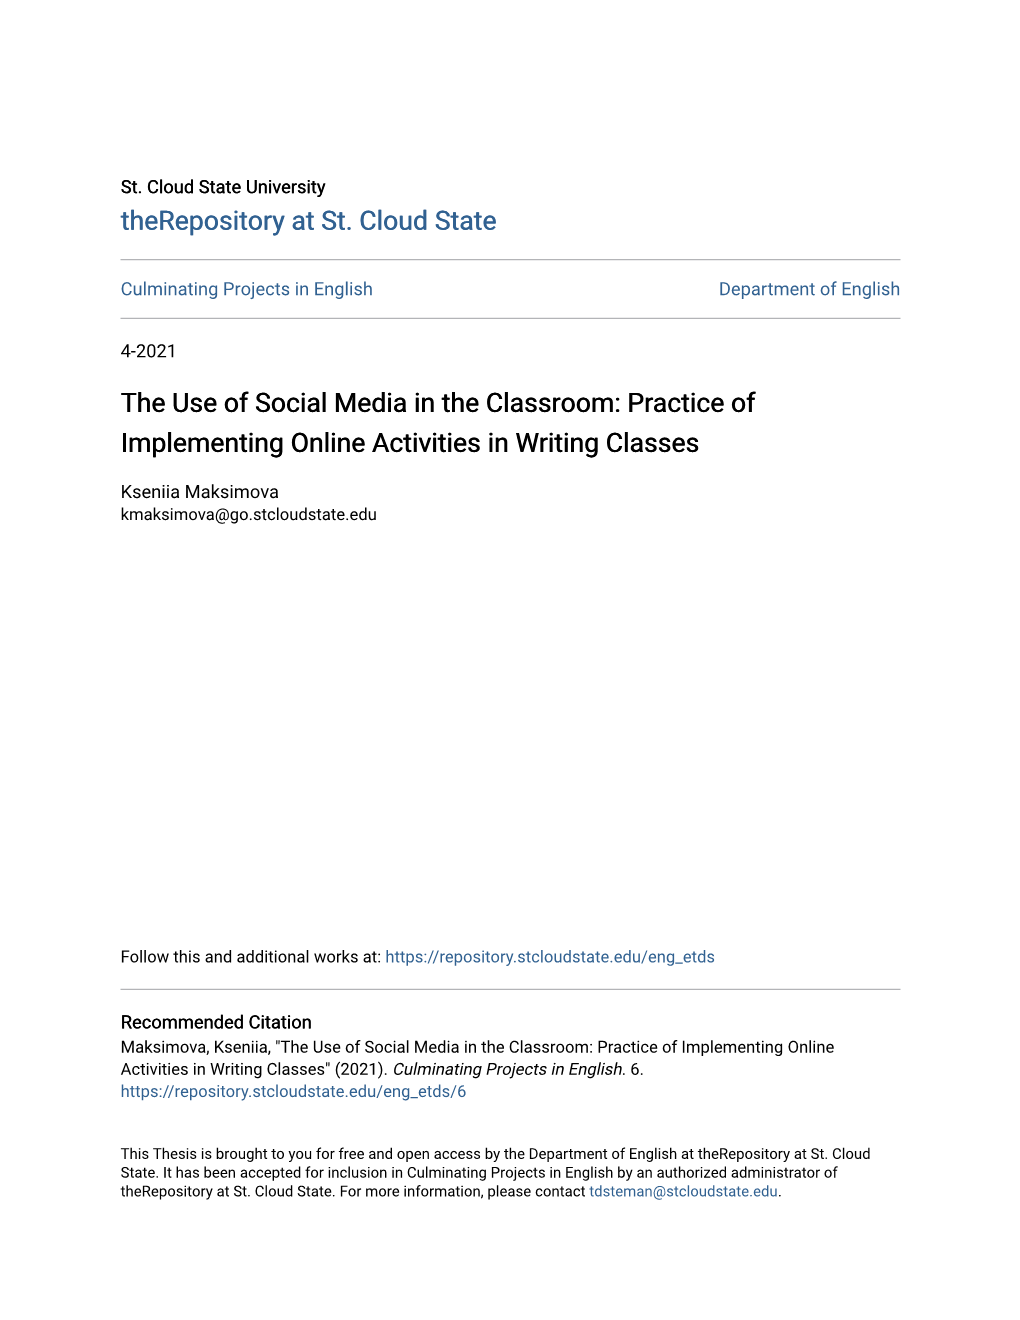 Practice of Implementing Online Activities in Writing Classes